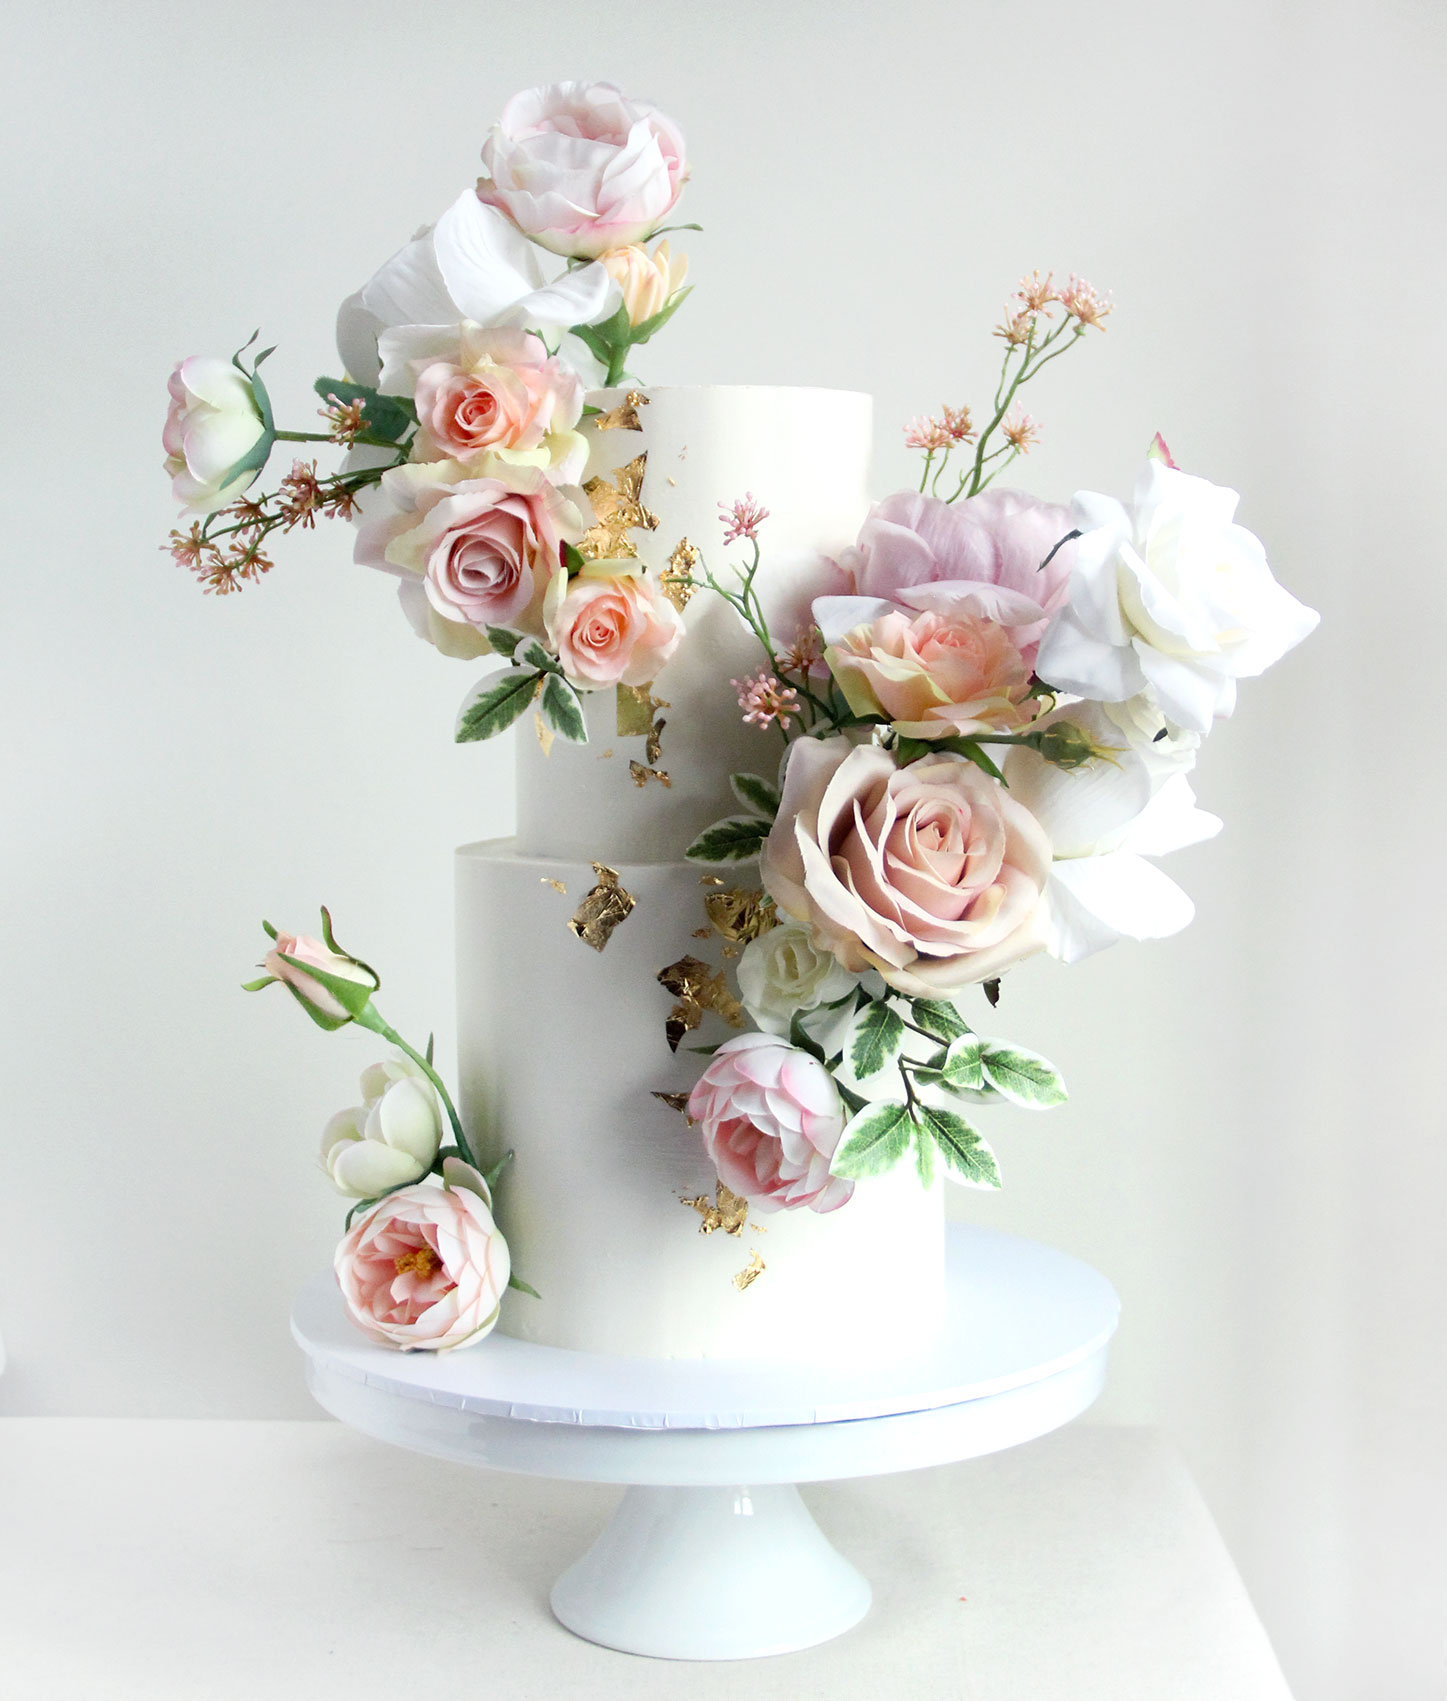 2 Tier All White & Romantic Pastel Pink Flowers